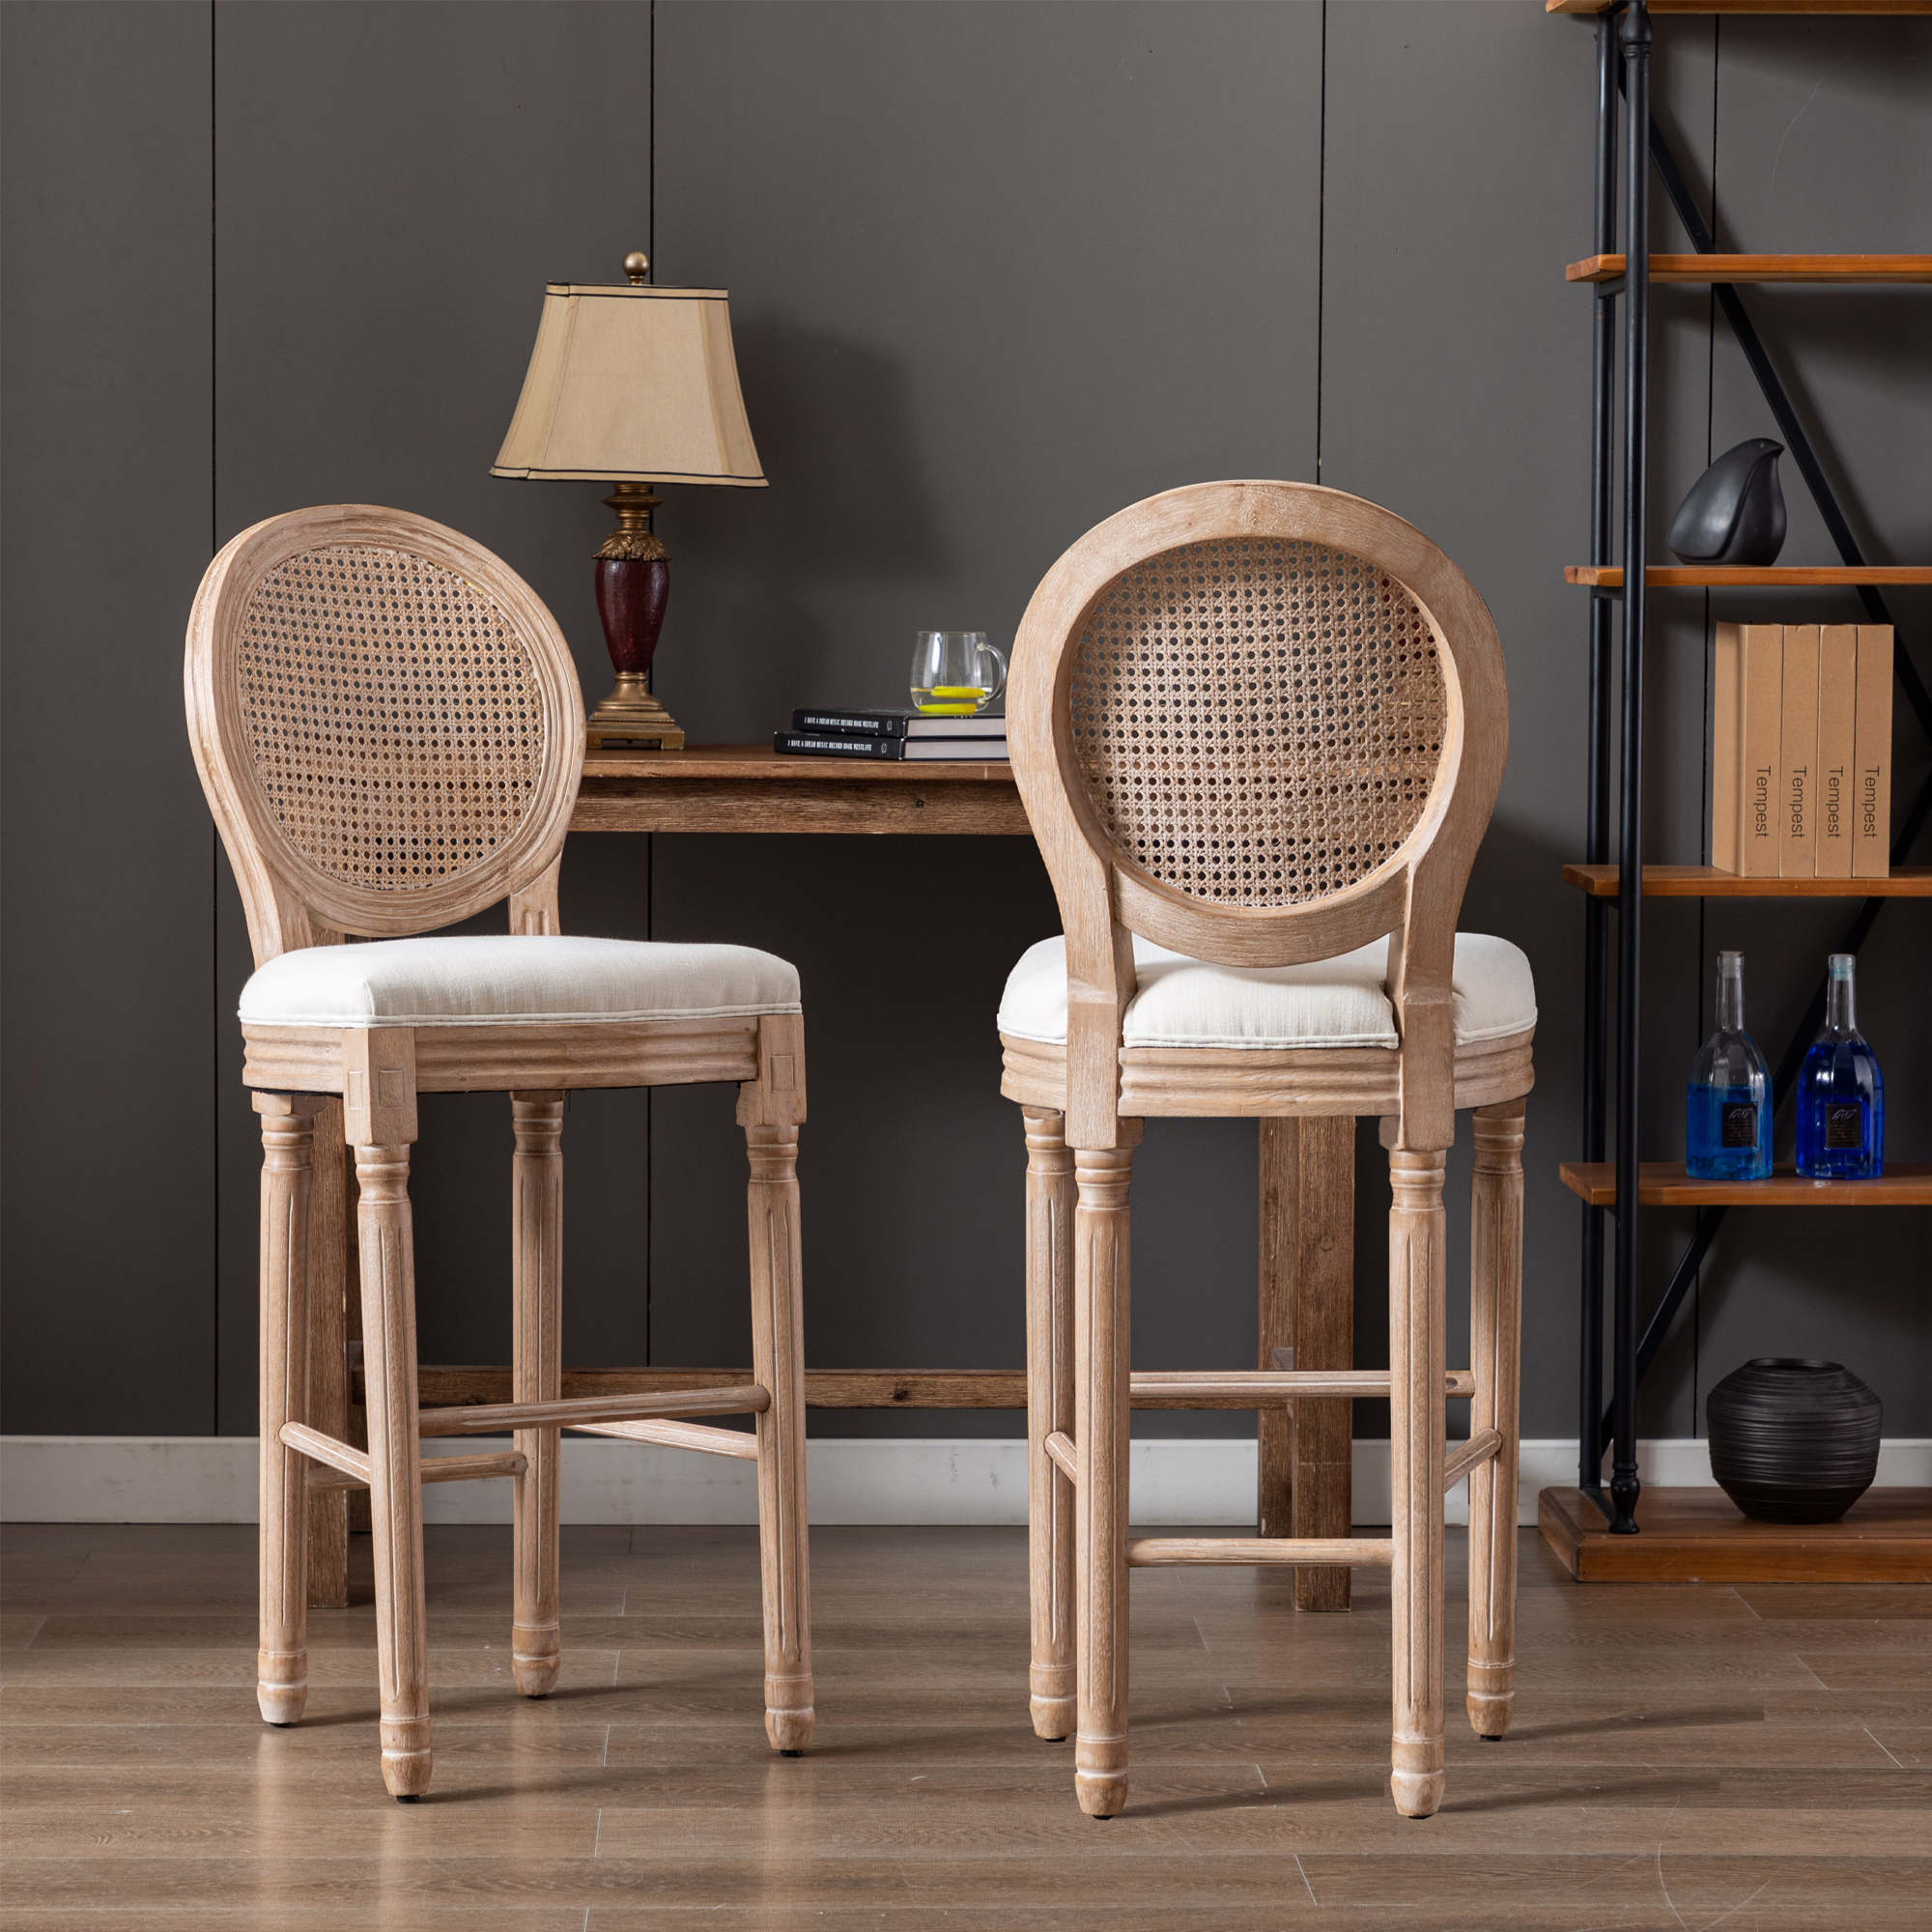 Hengming French Country Wooden Barstools Rattan Back With Upholstered Seating , Beige and Natural ，Set of 2-Boyel Living